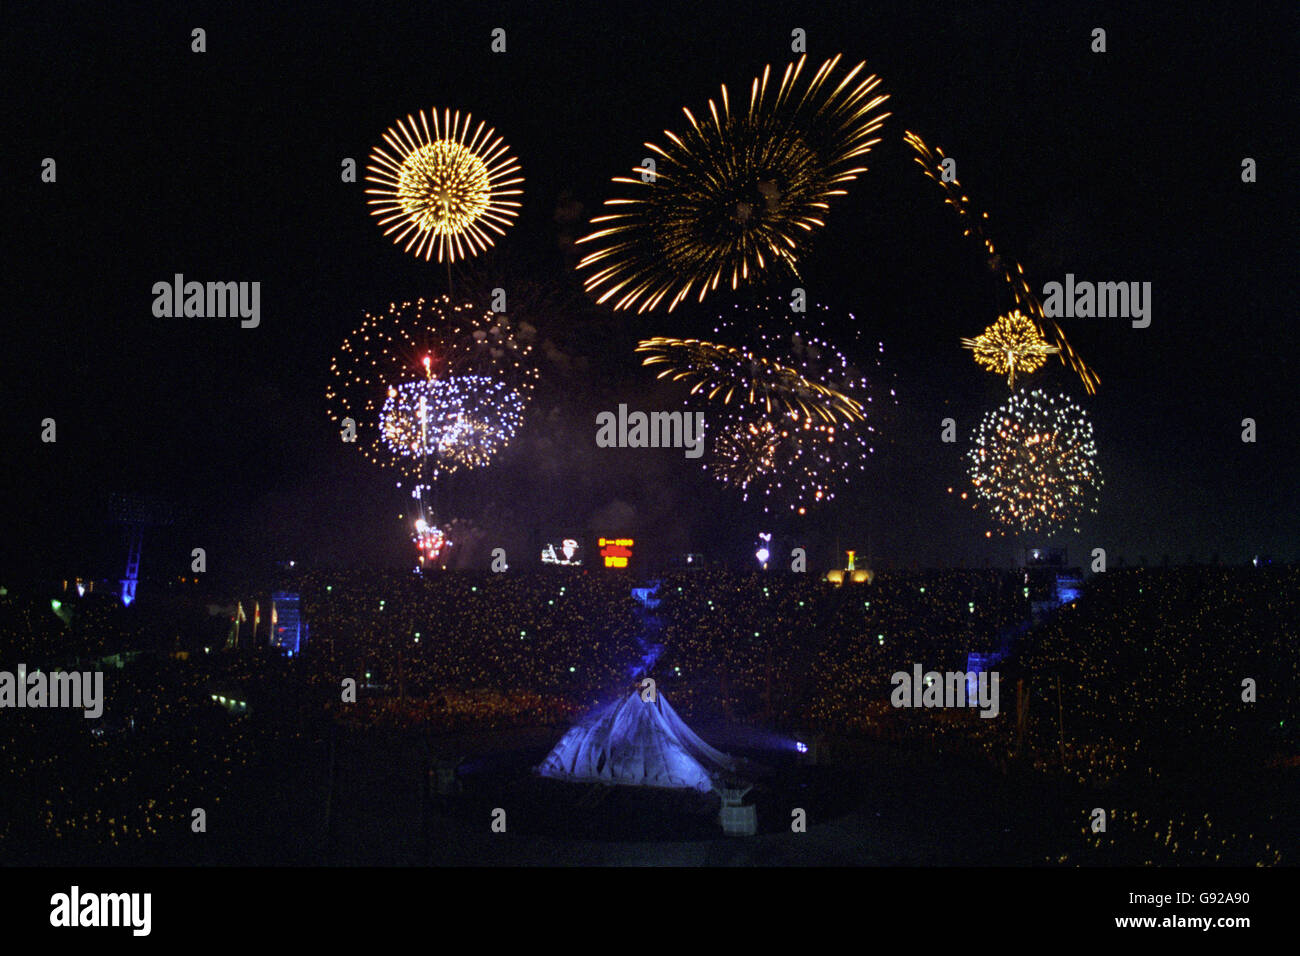 Fireworks explode in the night sky as the Winter Olympic Games draw to a close Stock Photo